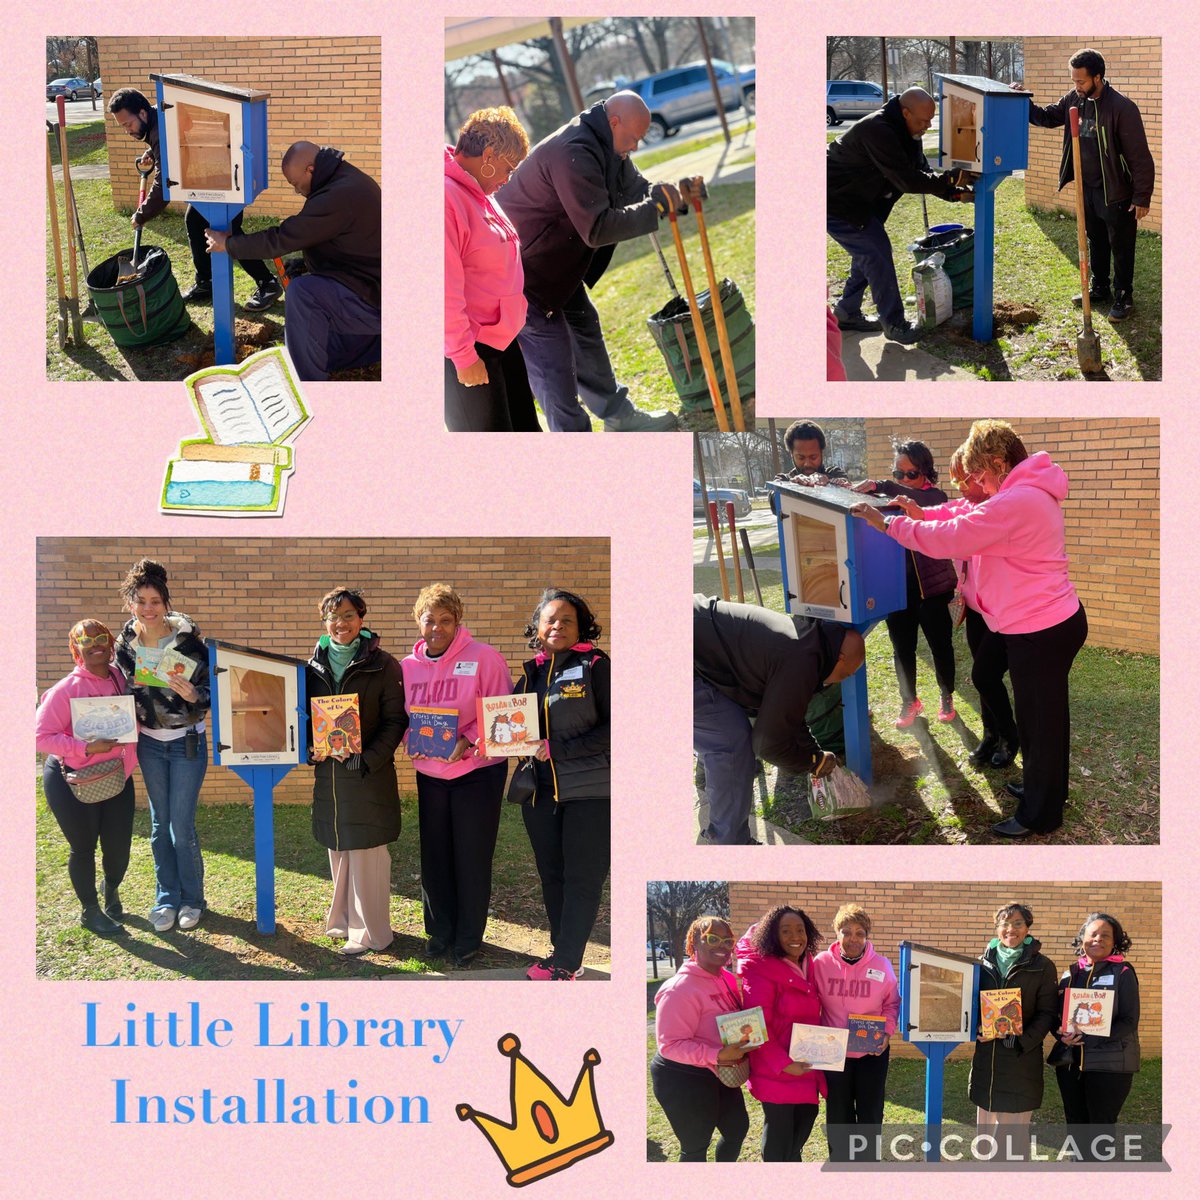 Today, the Little Library from the Top Ladies of Distinction was installed! This project has been in the works for over a year! We are excited about this great way to make sure our students have access to books & build a love for reading. @tlodpgcc @callmeMsWren @SharelleStagg